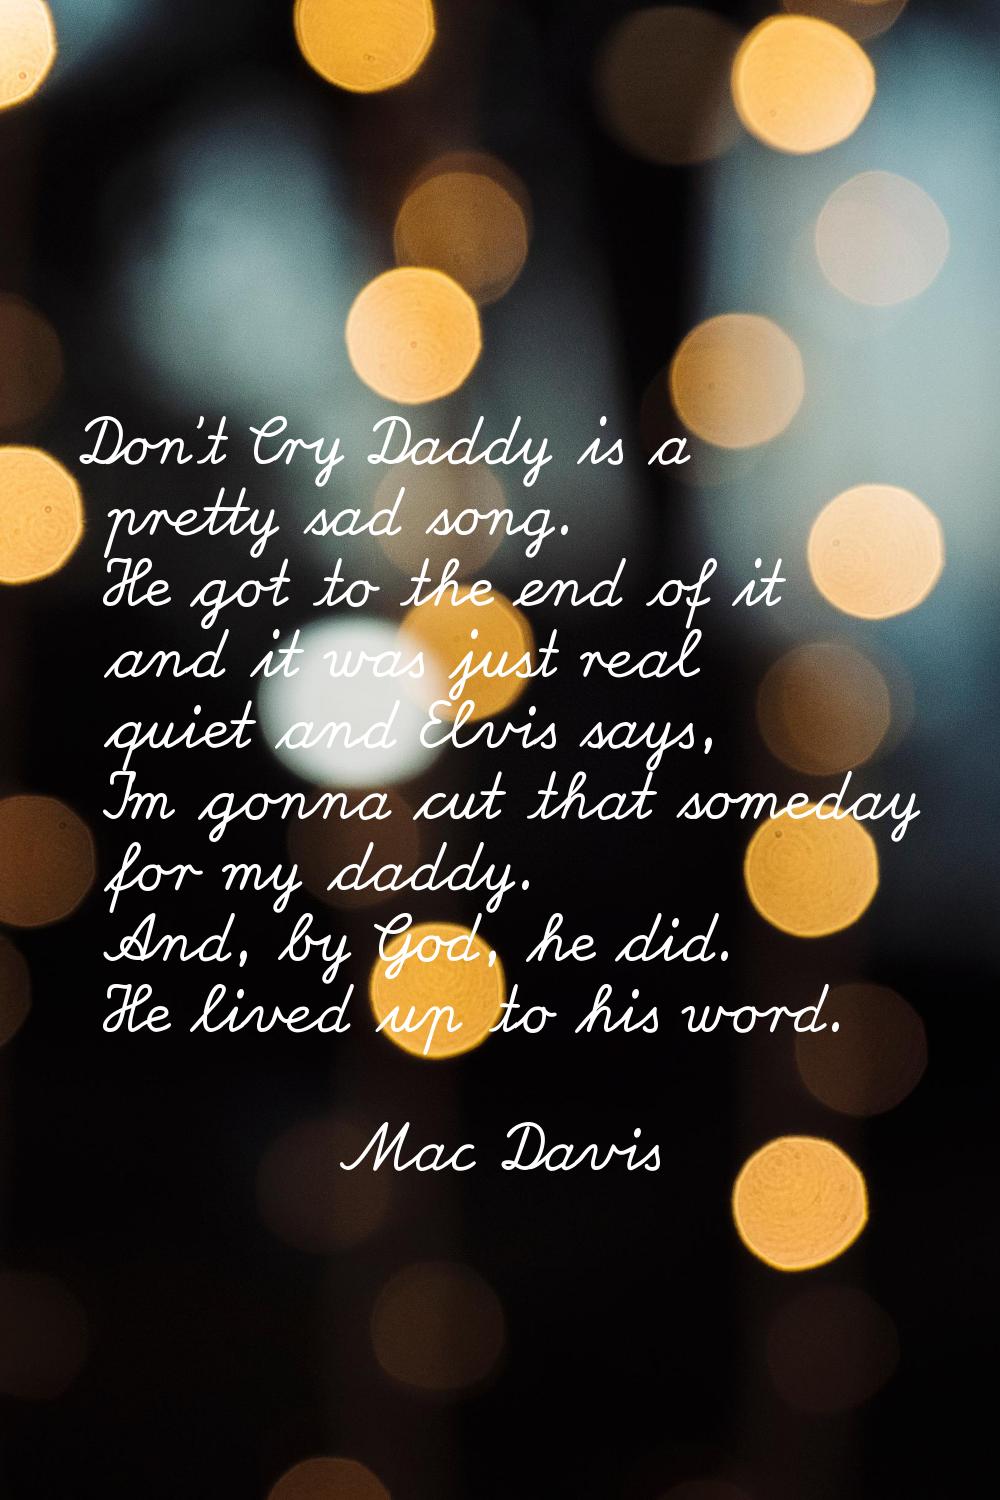 Don't Cry Daddy is a pretty sad song. He got to the end of it and it was just real quiet and Elvis 